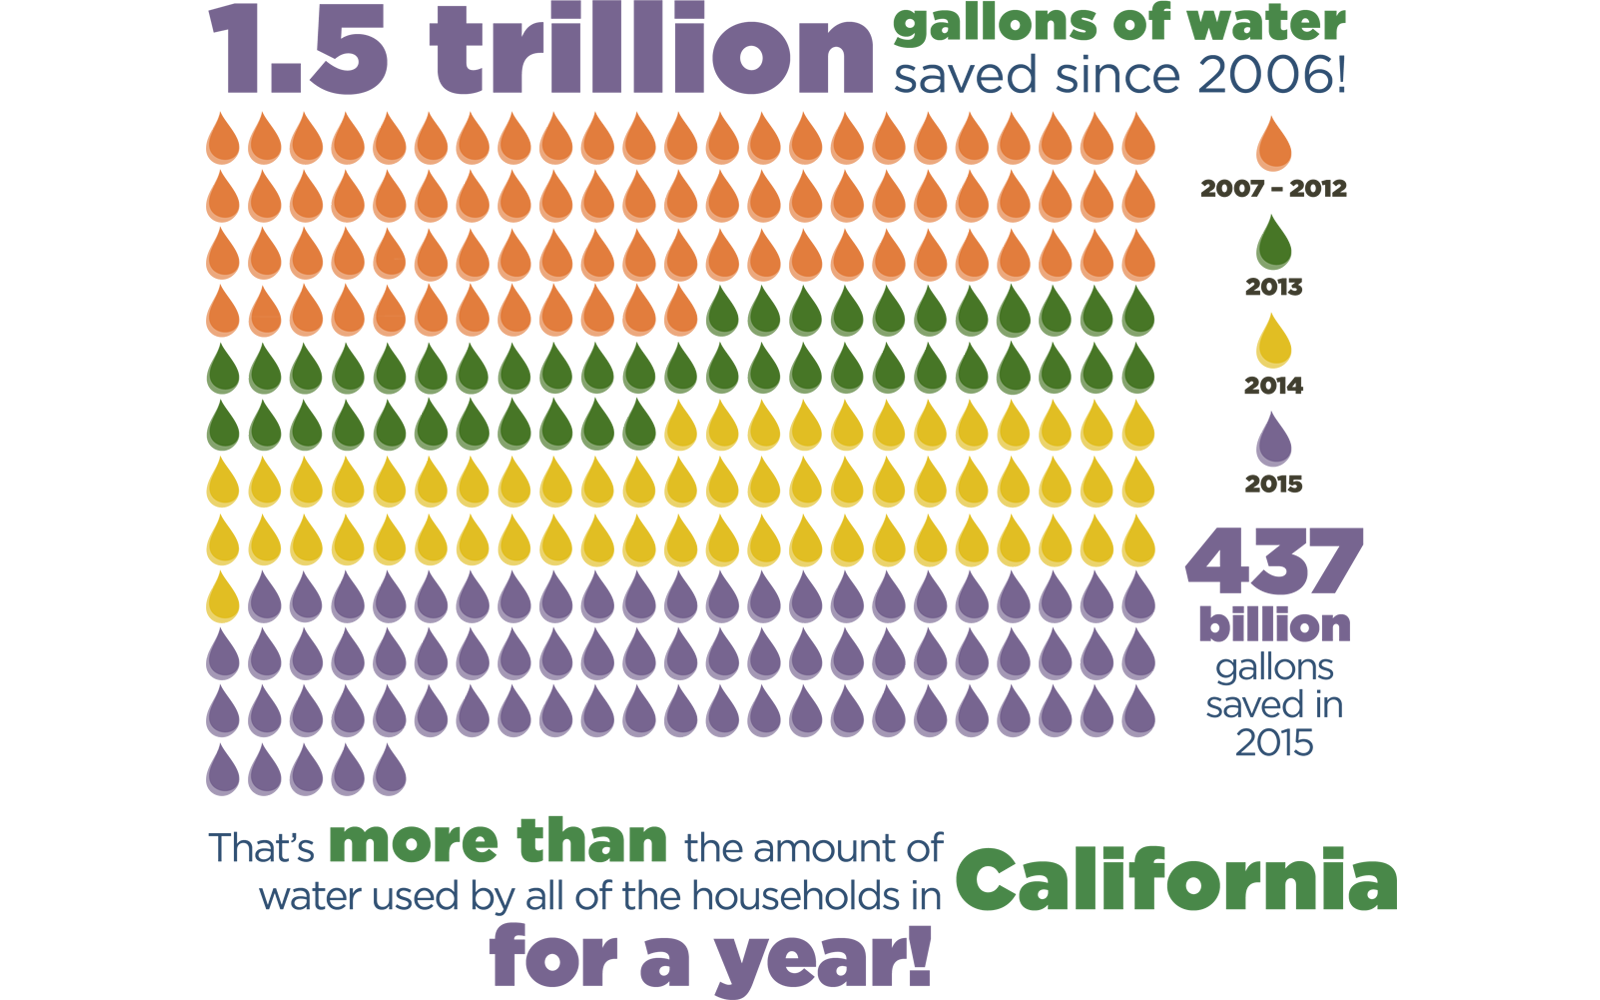 1.5 trillion gallons of water saved since 2006!